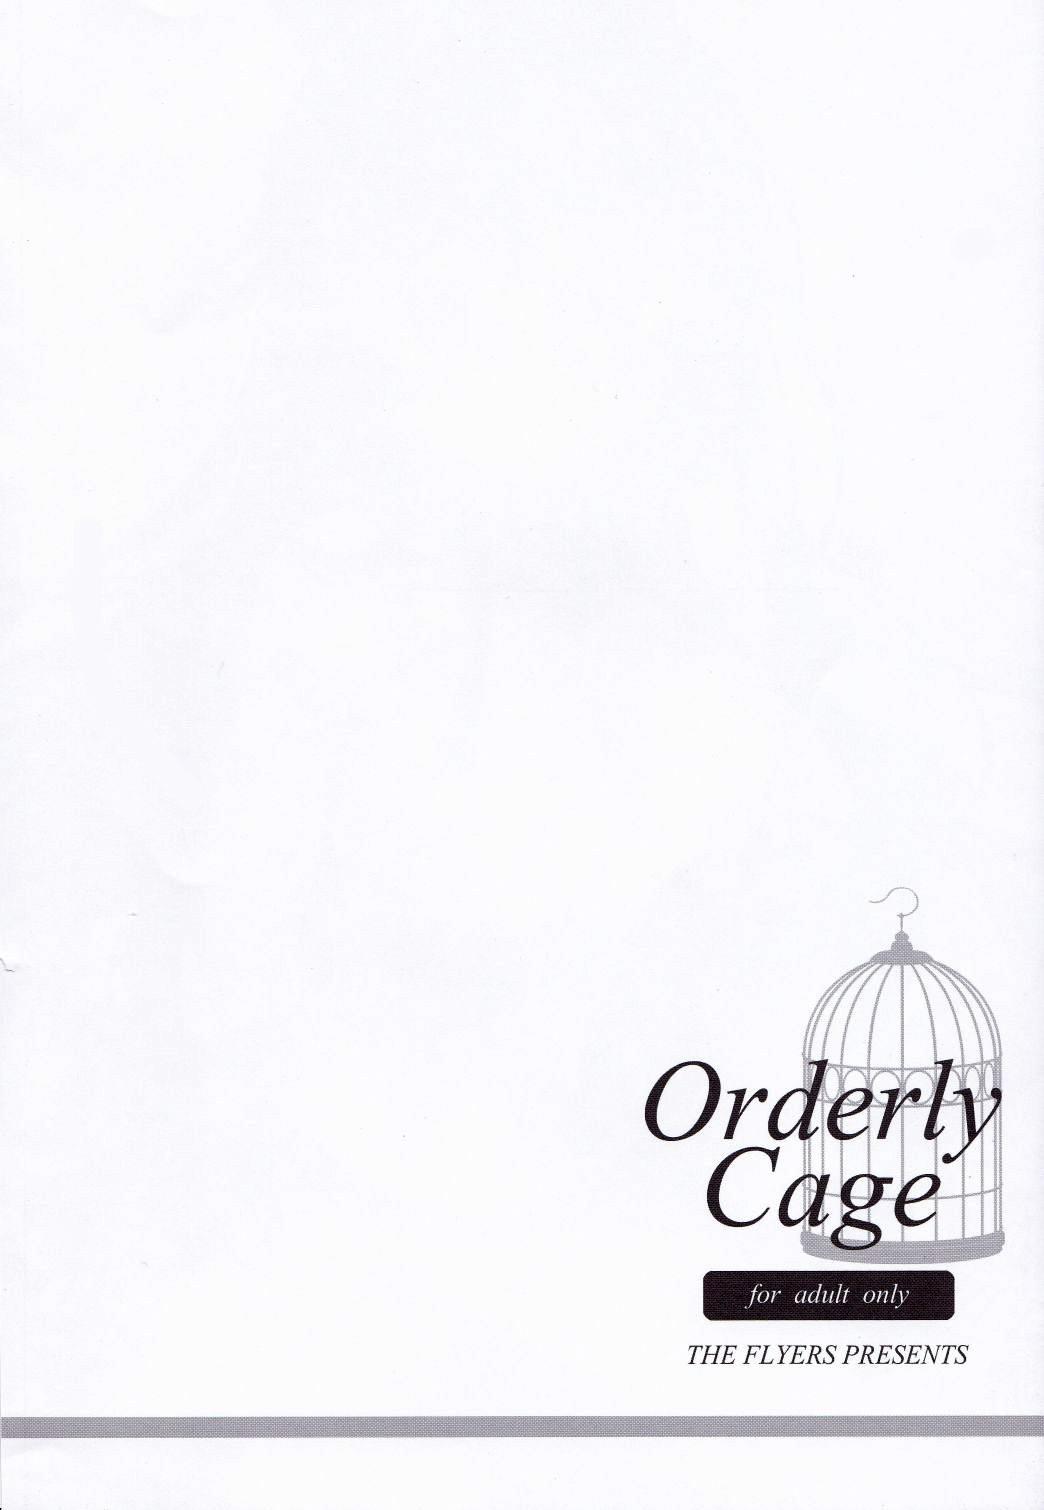 Orderly Cage 20